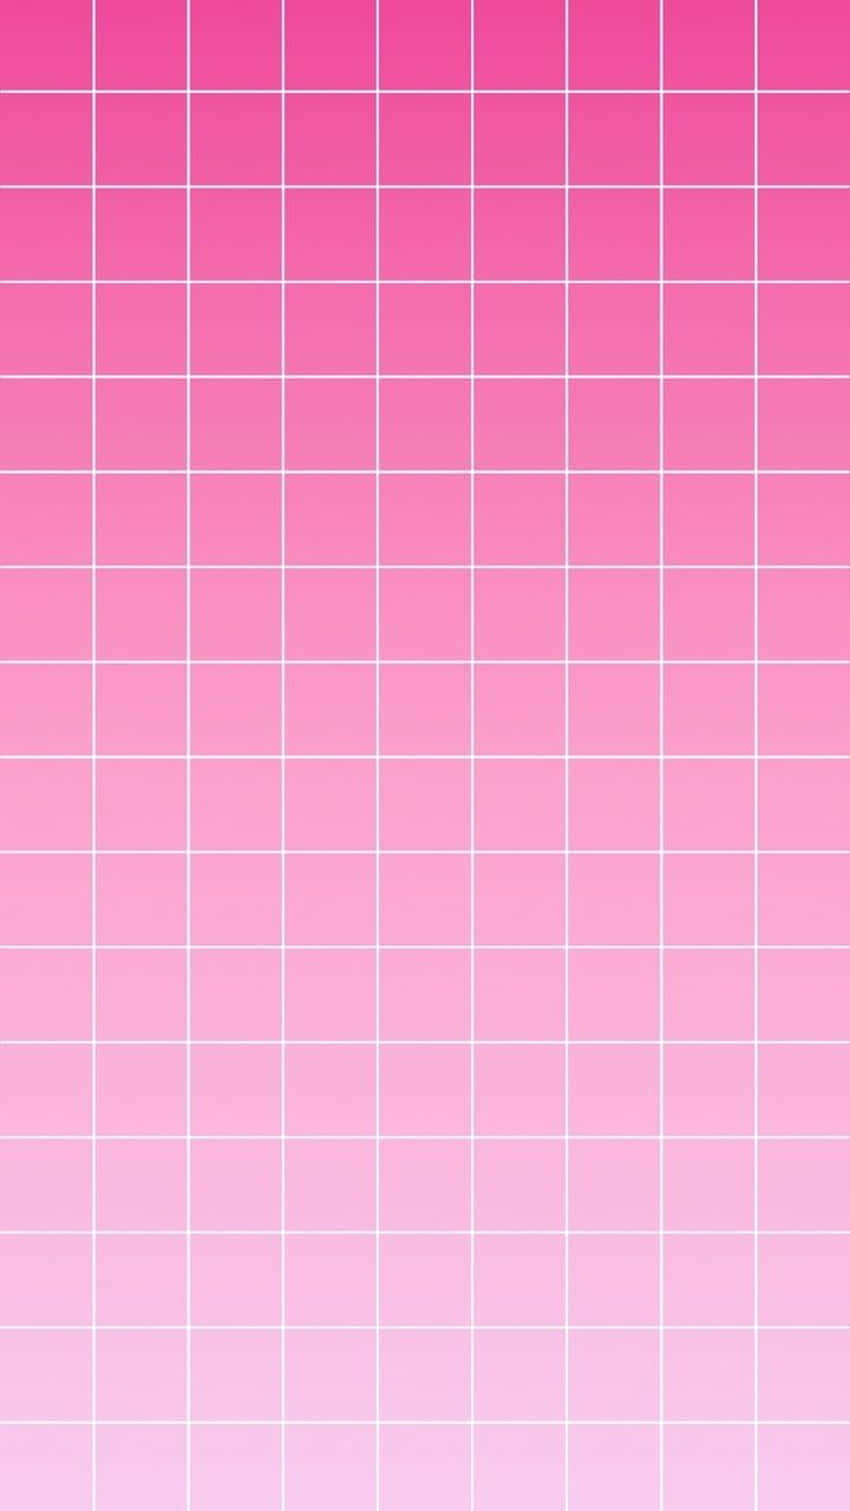 A Parallel Pink and White Grid on a Textured Background Wallpaper